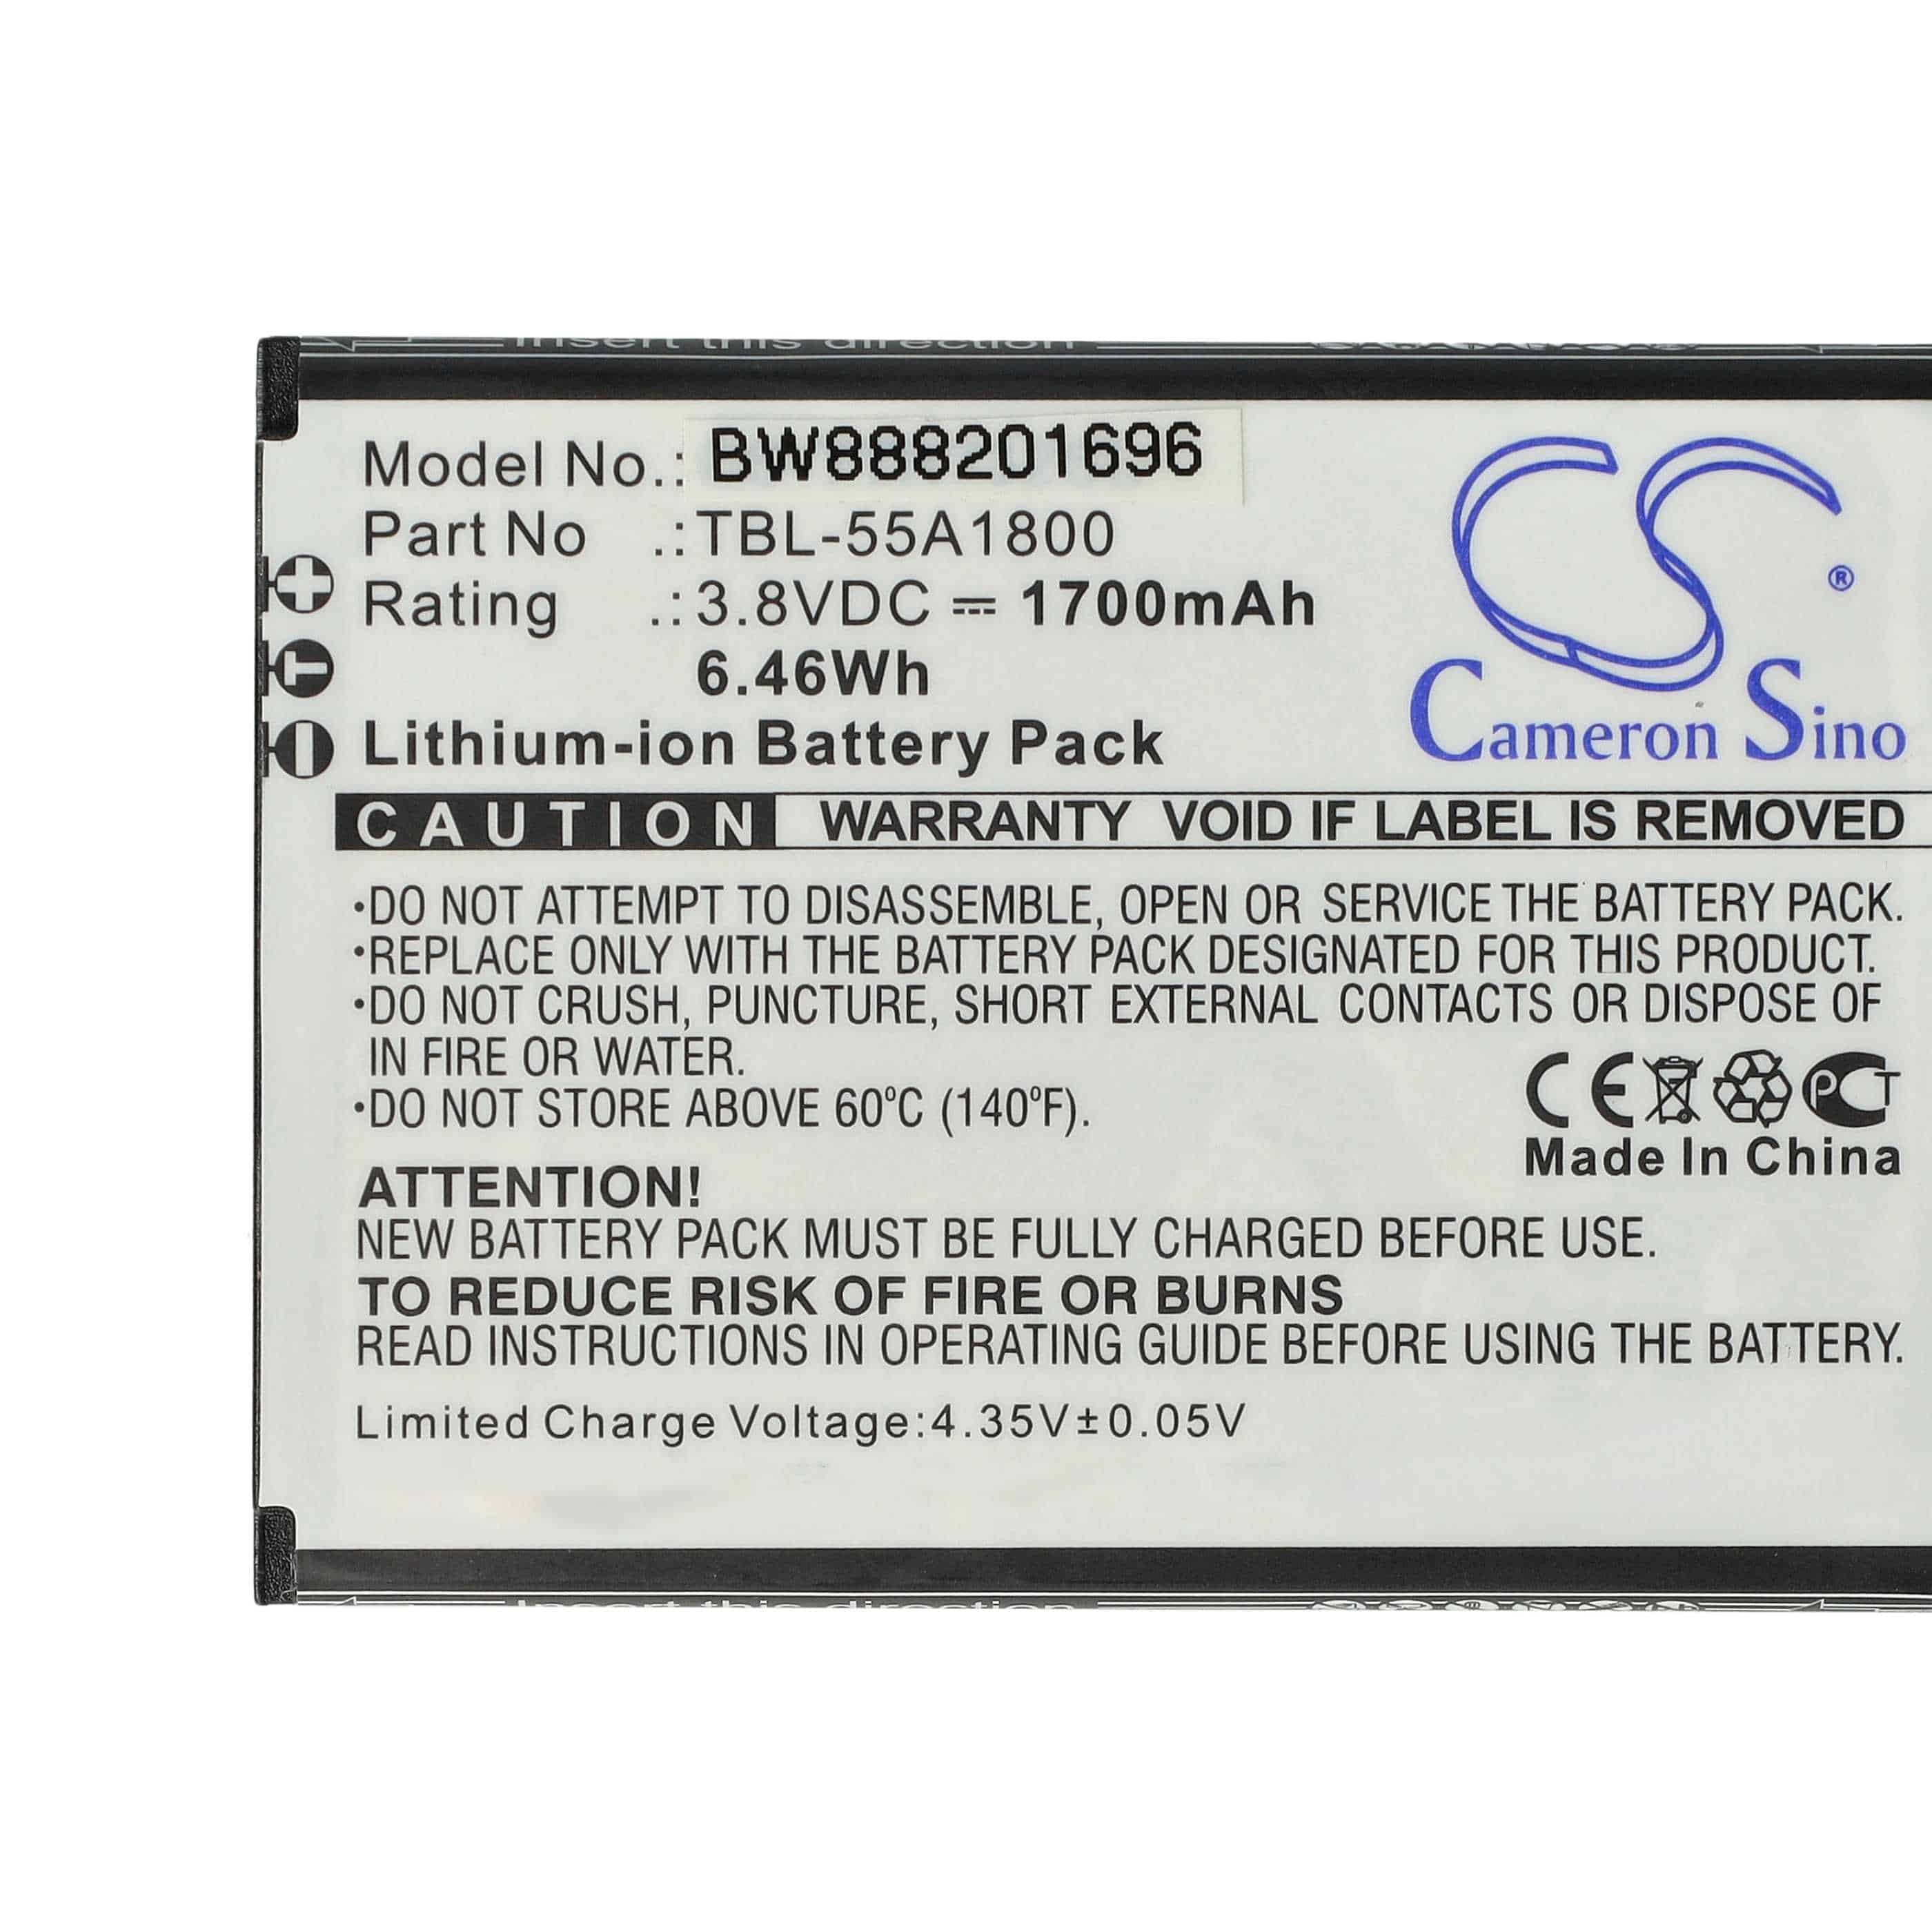 Mobile Router Battery Replacement for TP-Link TBL-55A1800 - 1700mAh 3.8V Li-Ion